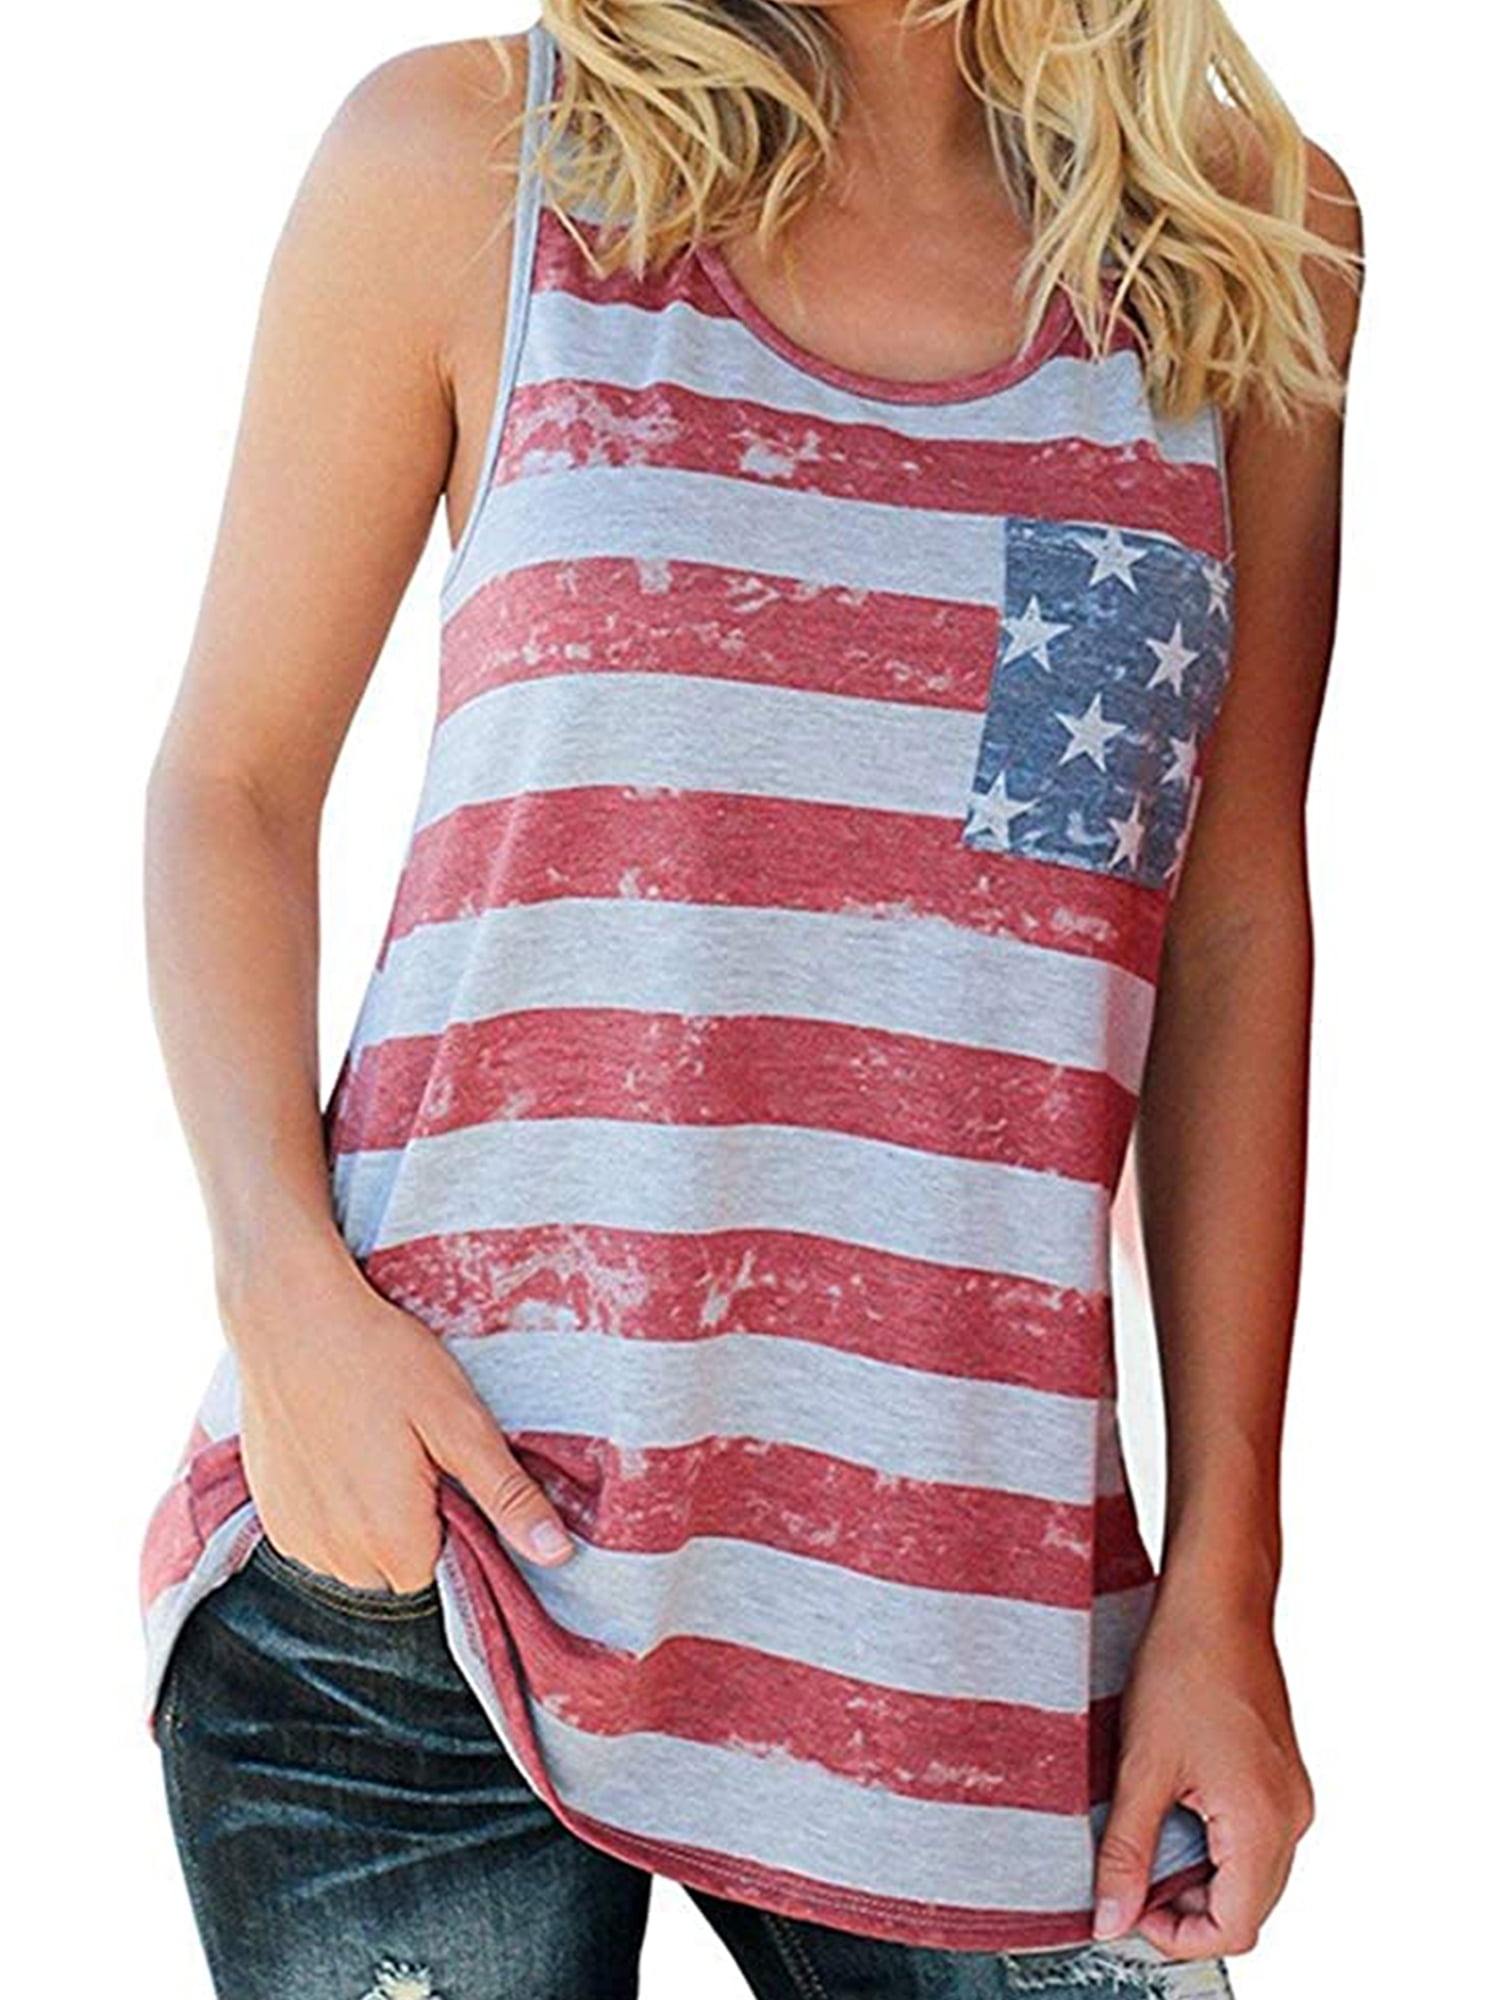 Drinking Tank Top Funny July 4th Tank Red White and Booze Tank 4th of July Tank Top Women 4th Drinking Shirt Red White and Beer Tank